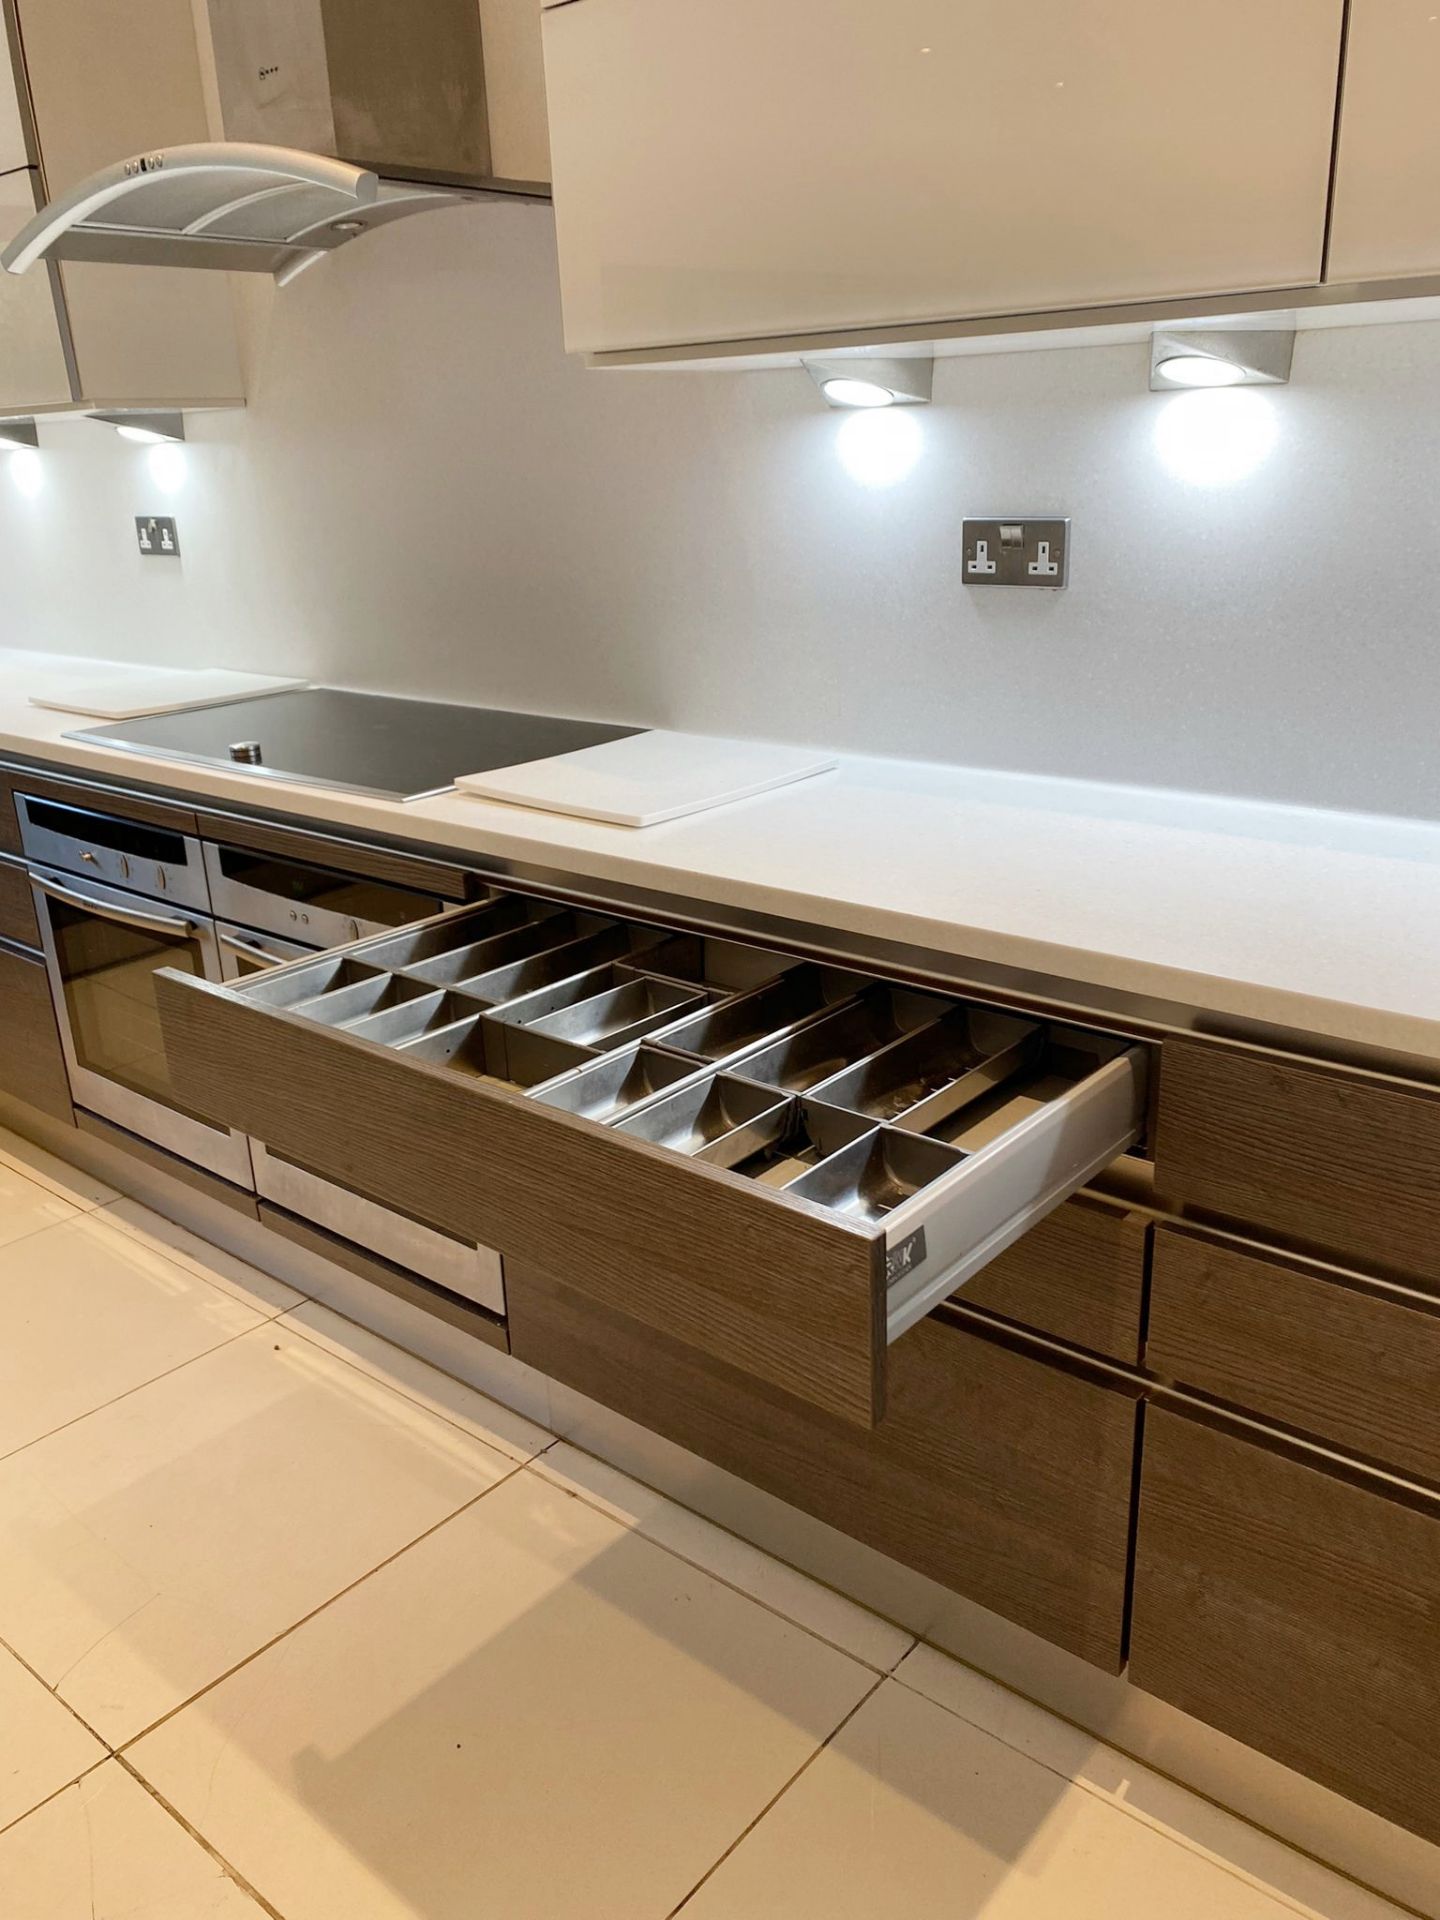 Bespoke Fitted Premium RWK German Kitchen With NEFF Appliances, Corian Worktops And Central Island - Image 19 of 30